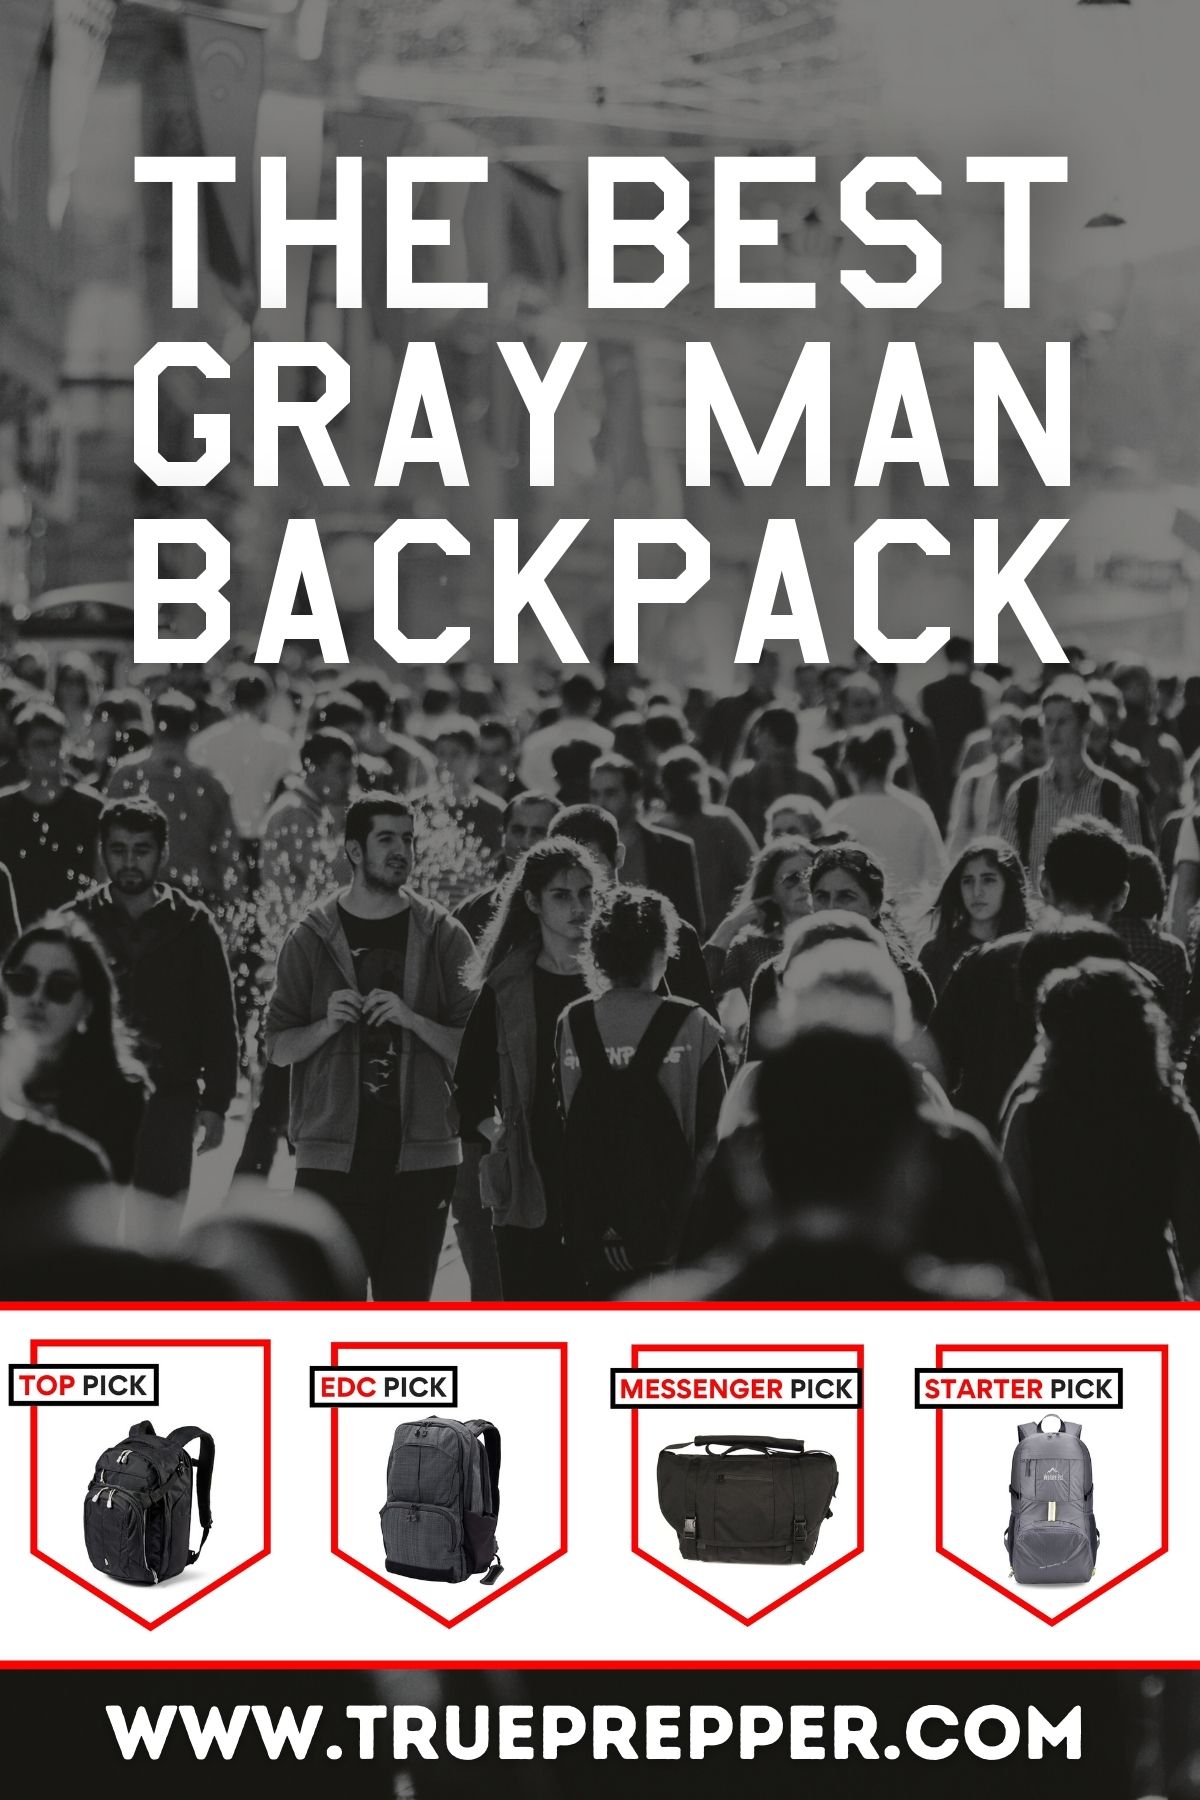 The Best Gray Man Backpack